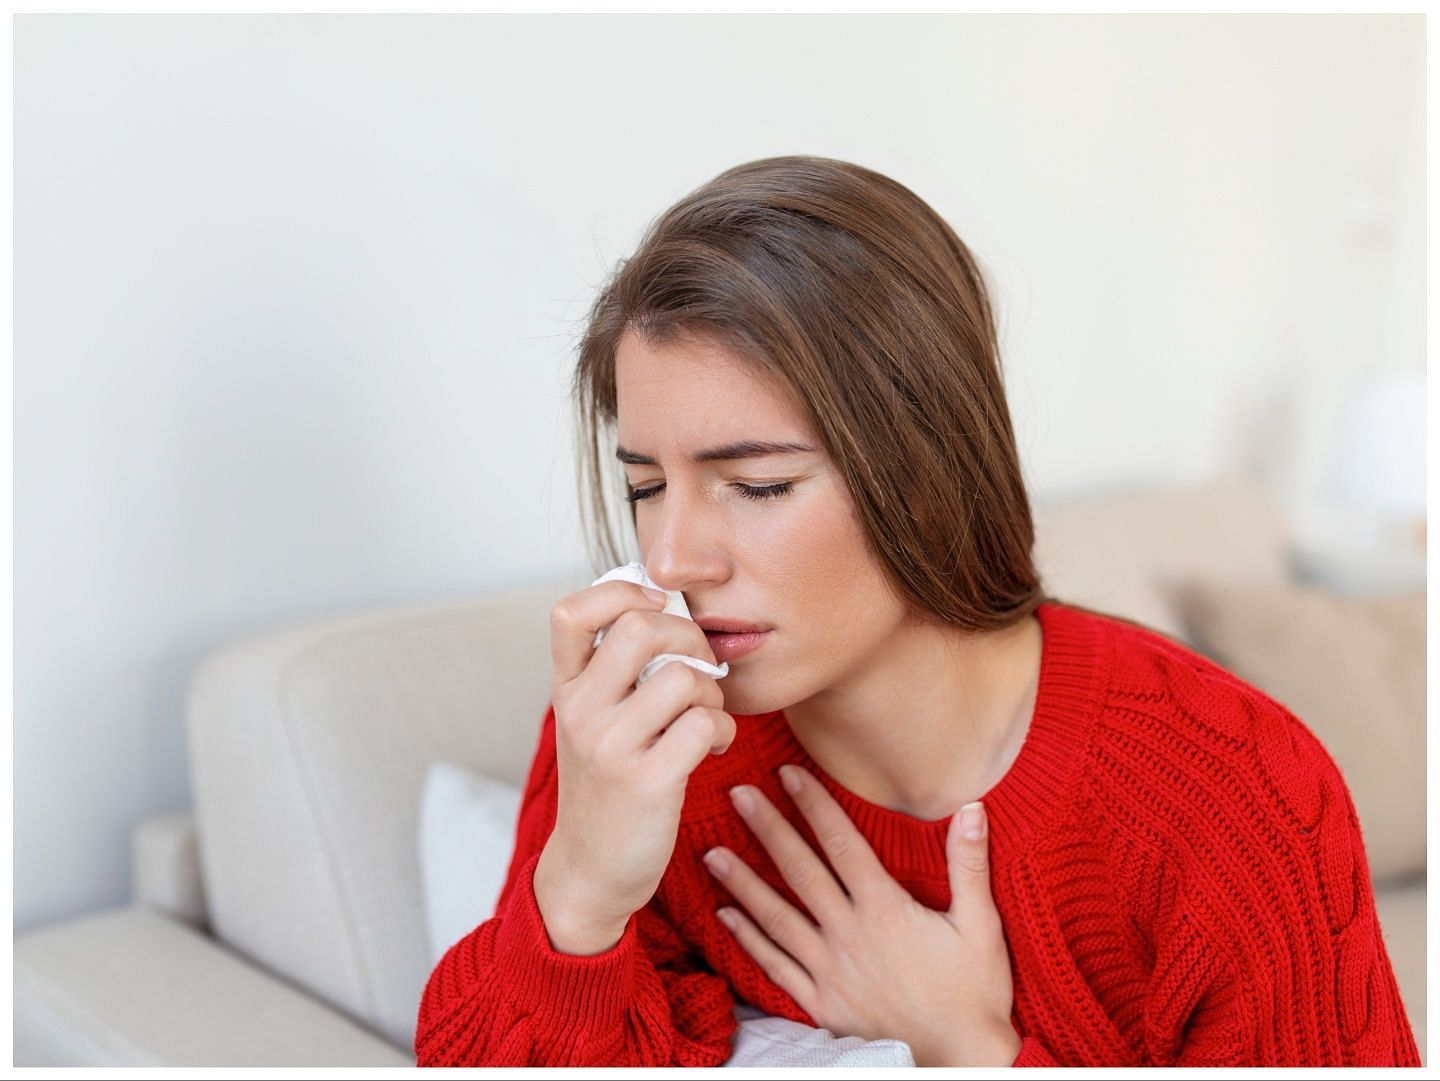 Long nails might cause breathing-related issues(Image via Vecteezy)